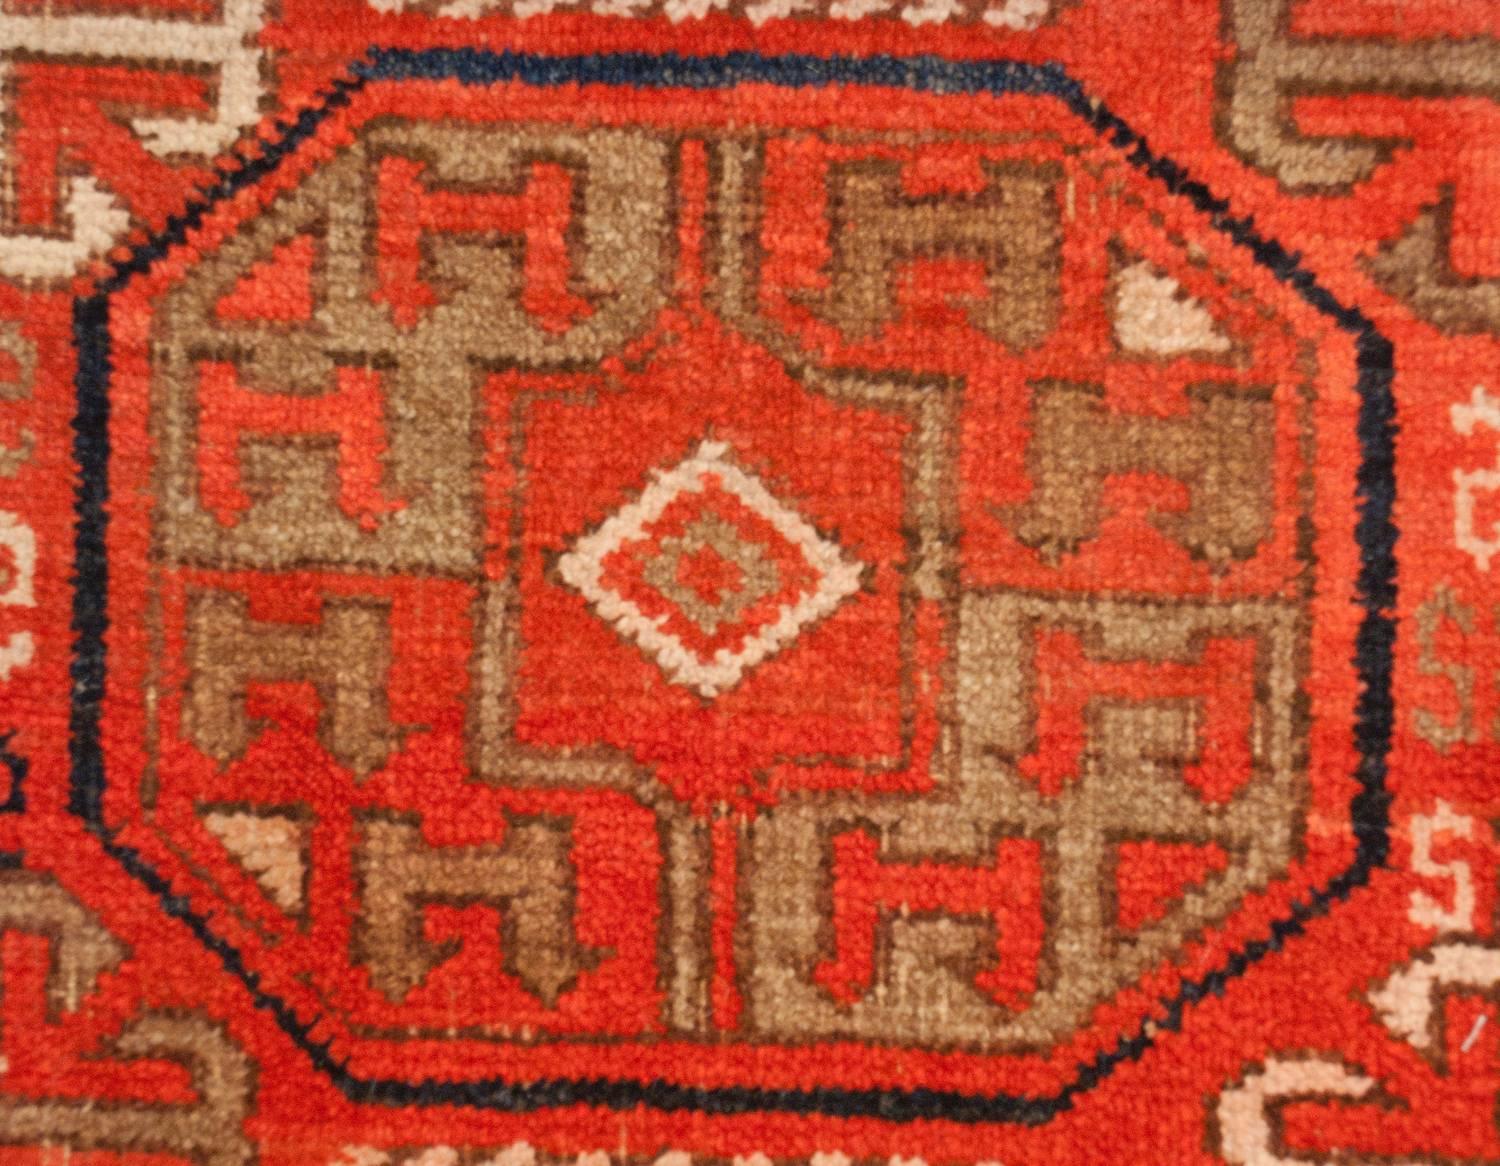 An exceptional early 20th century Persian Ersari rug with an incredible pattern with multiple octagonal medallions on a rich crimson background. Between each medallion are simple, four-armed stylized floral motifs. Each medallion contains a